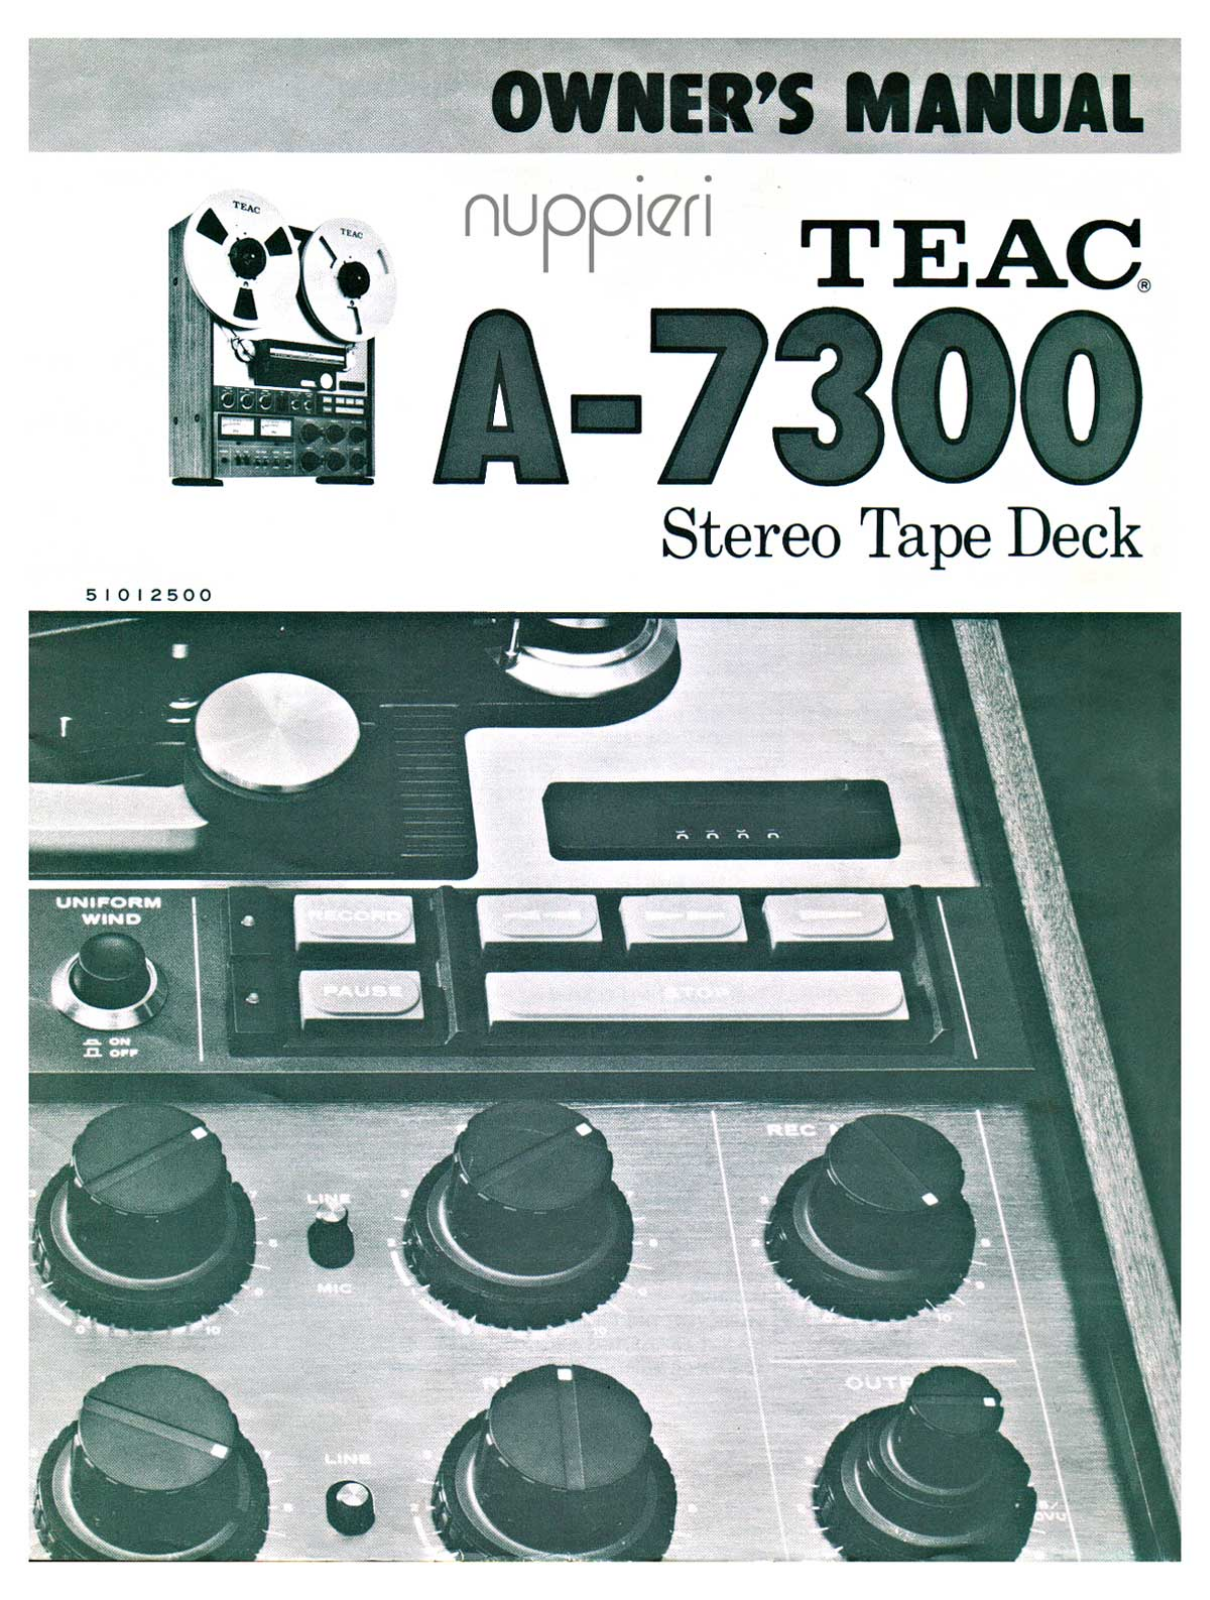 TEAC A-7300 Owners manual